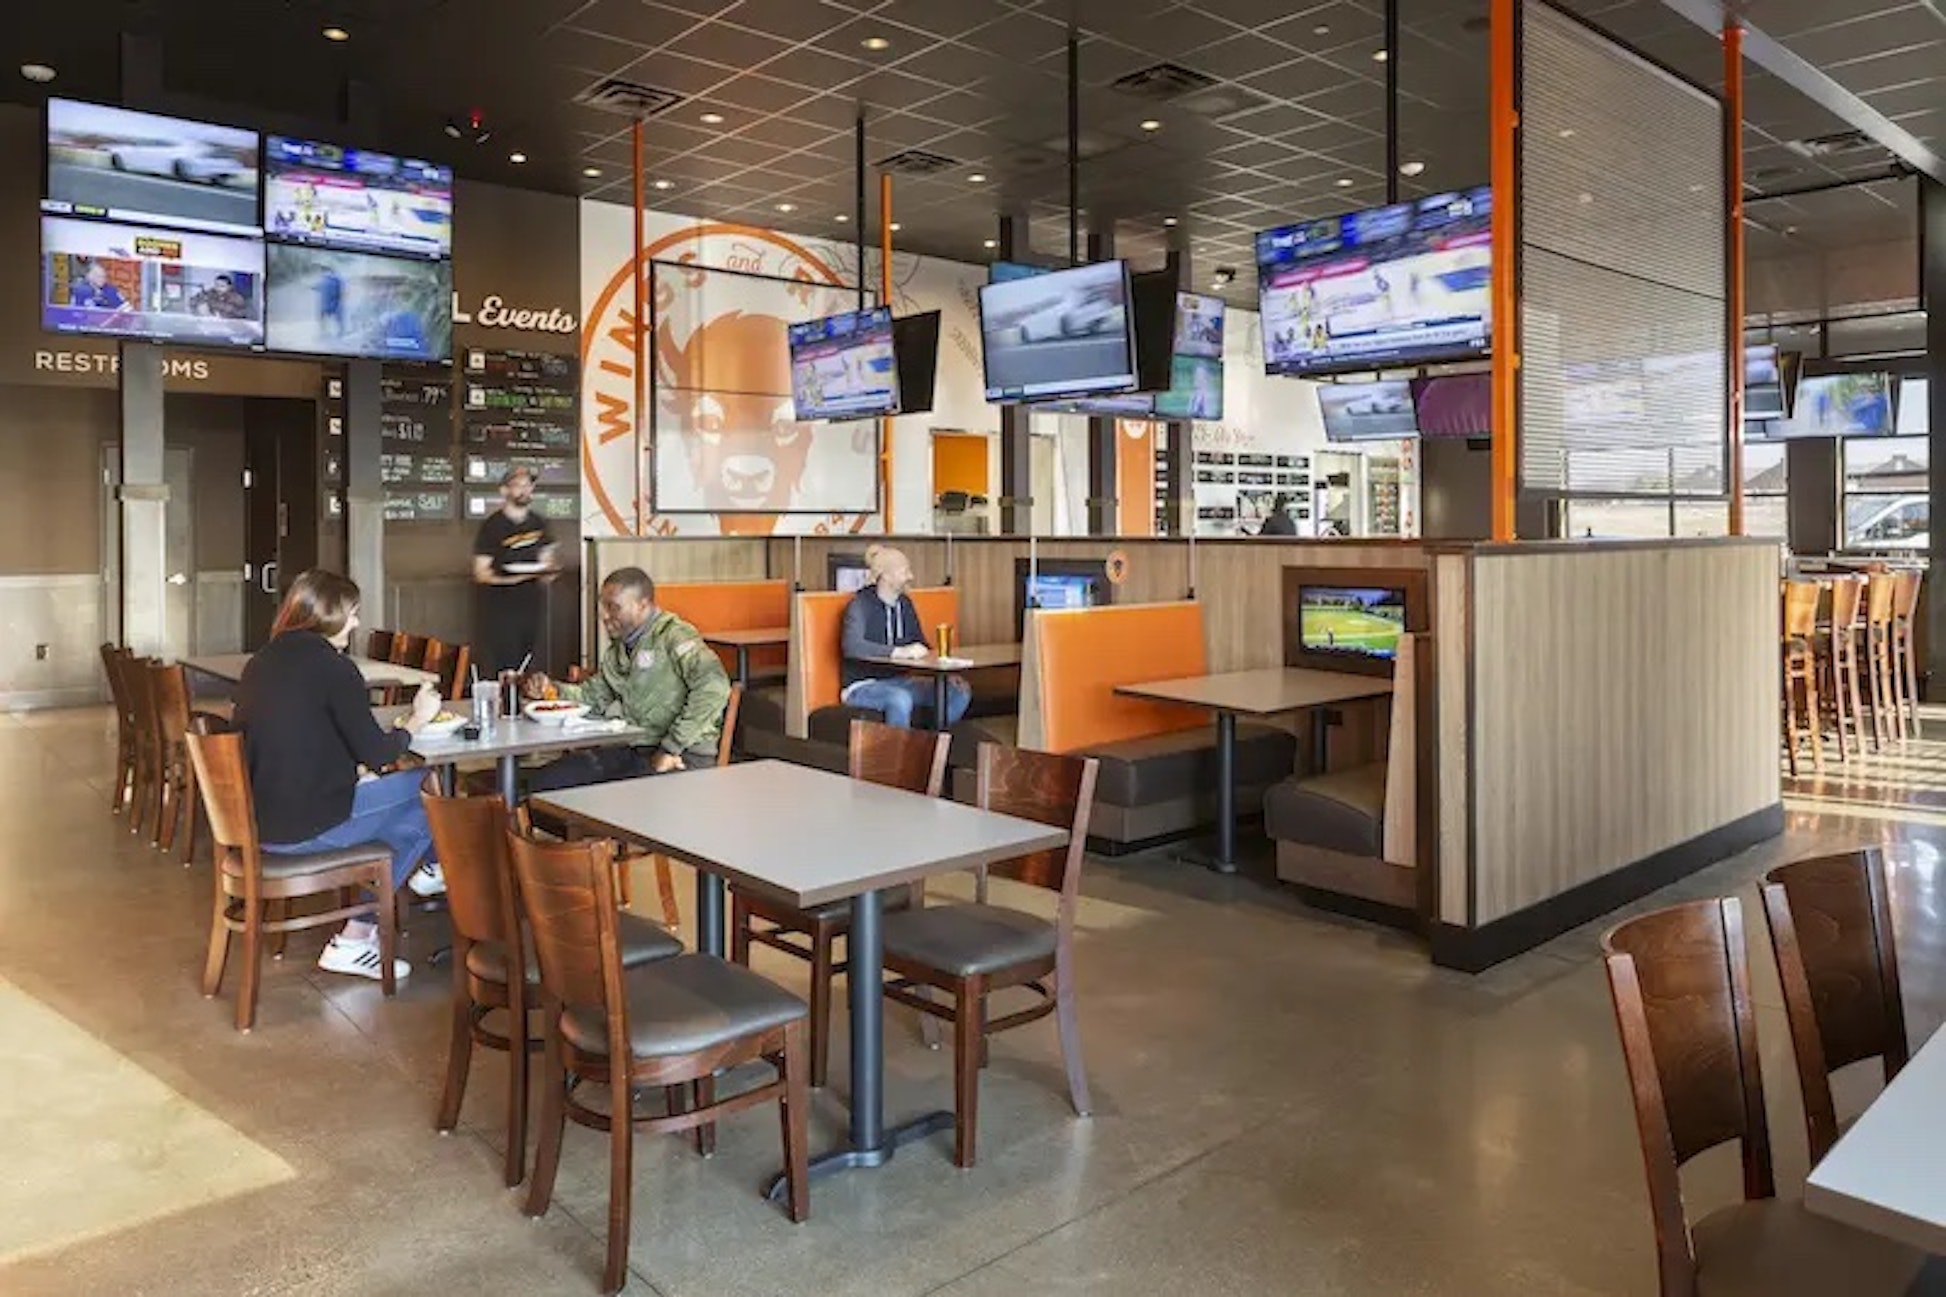 Thousands of Sports Bars, Only One Wings and Rings